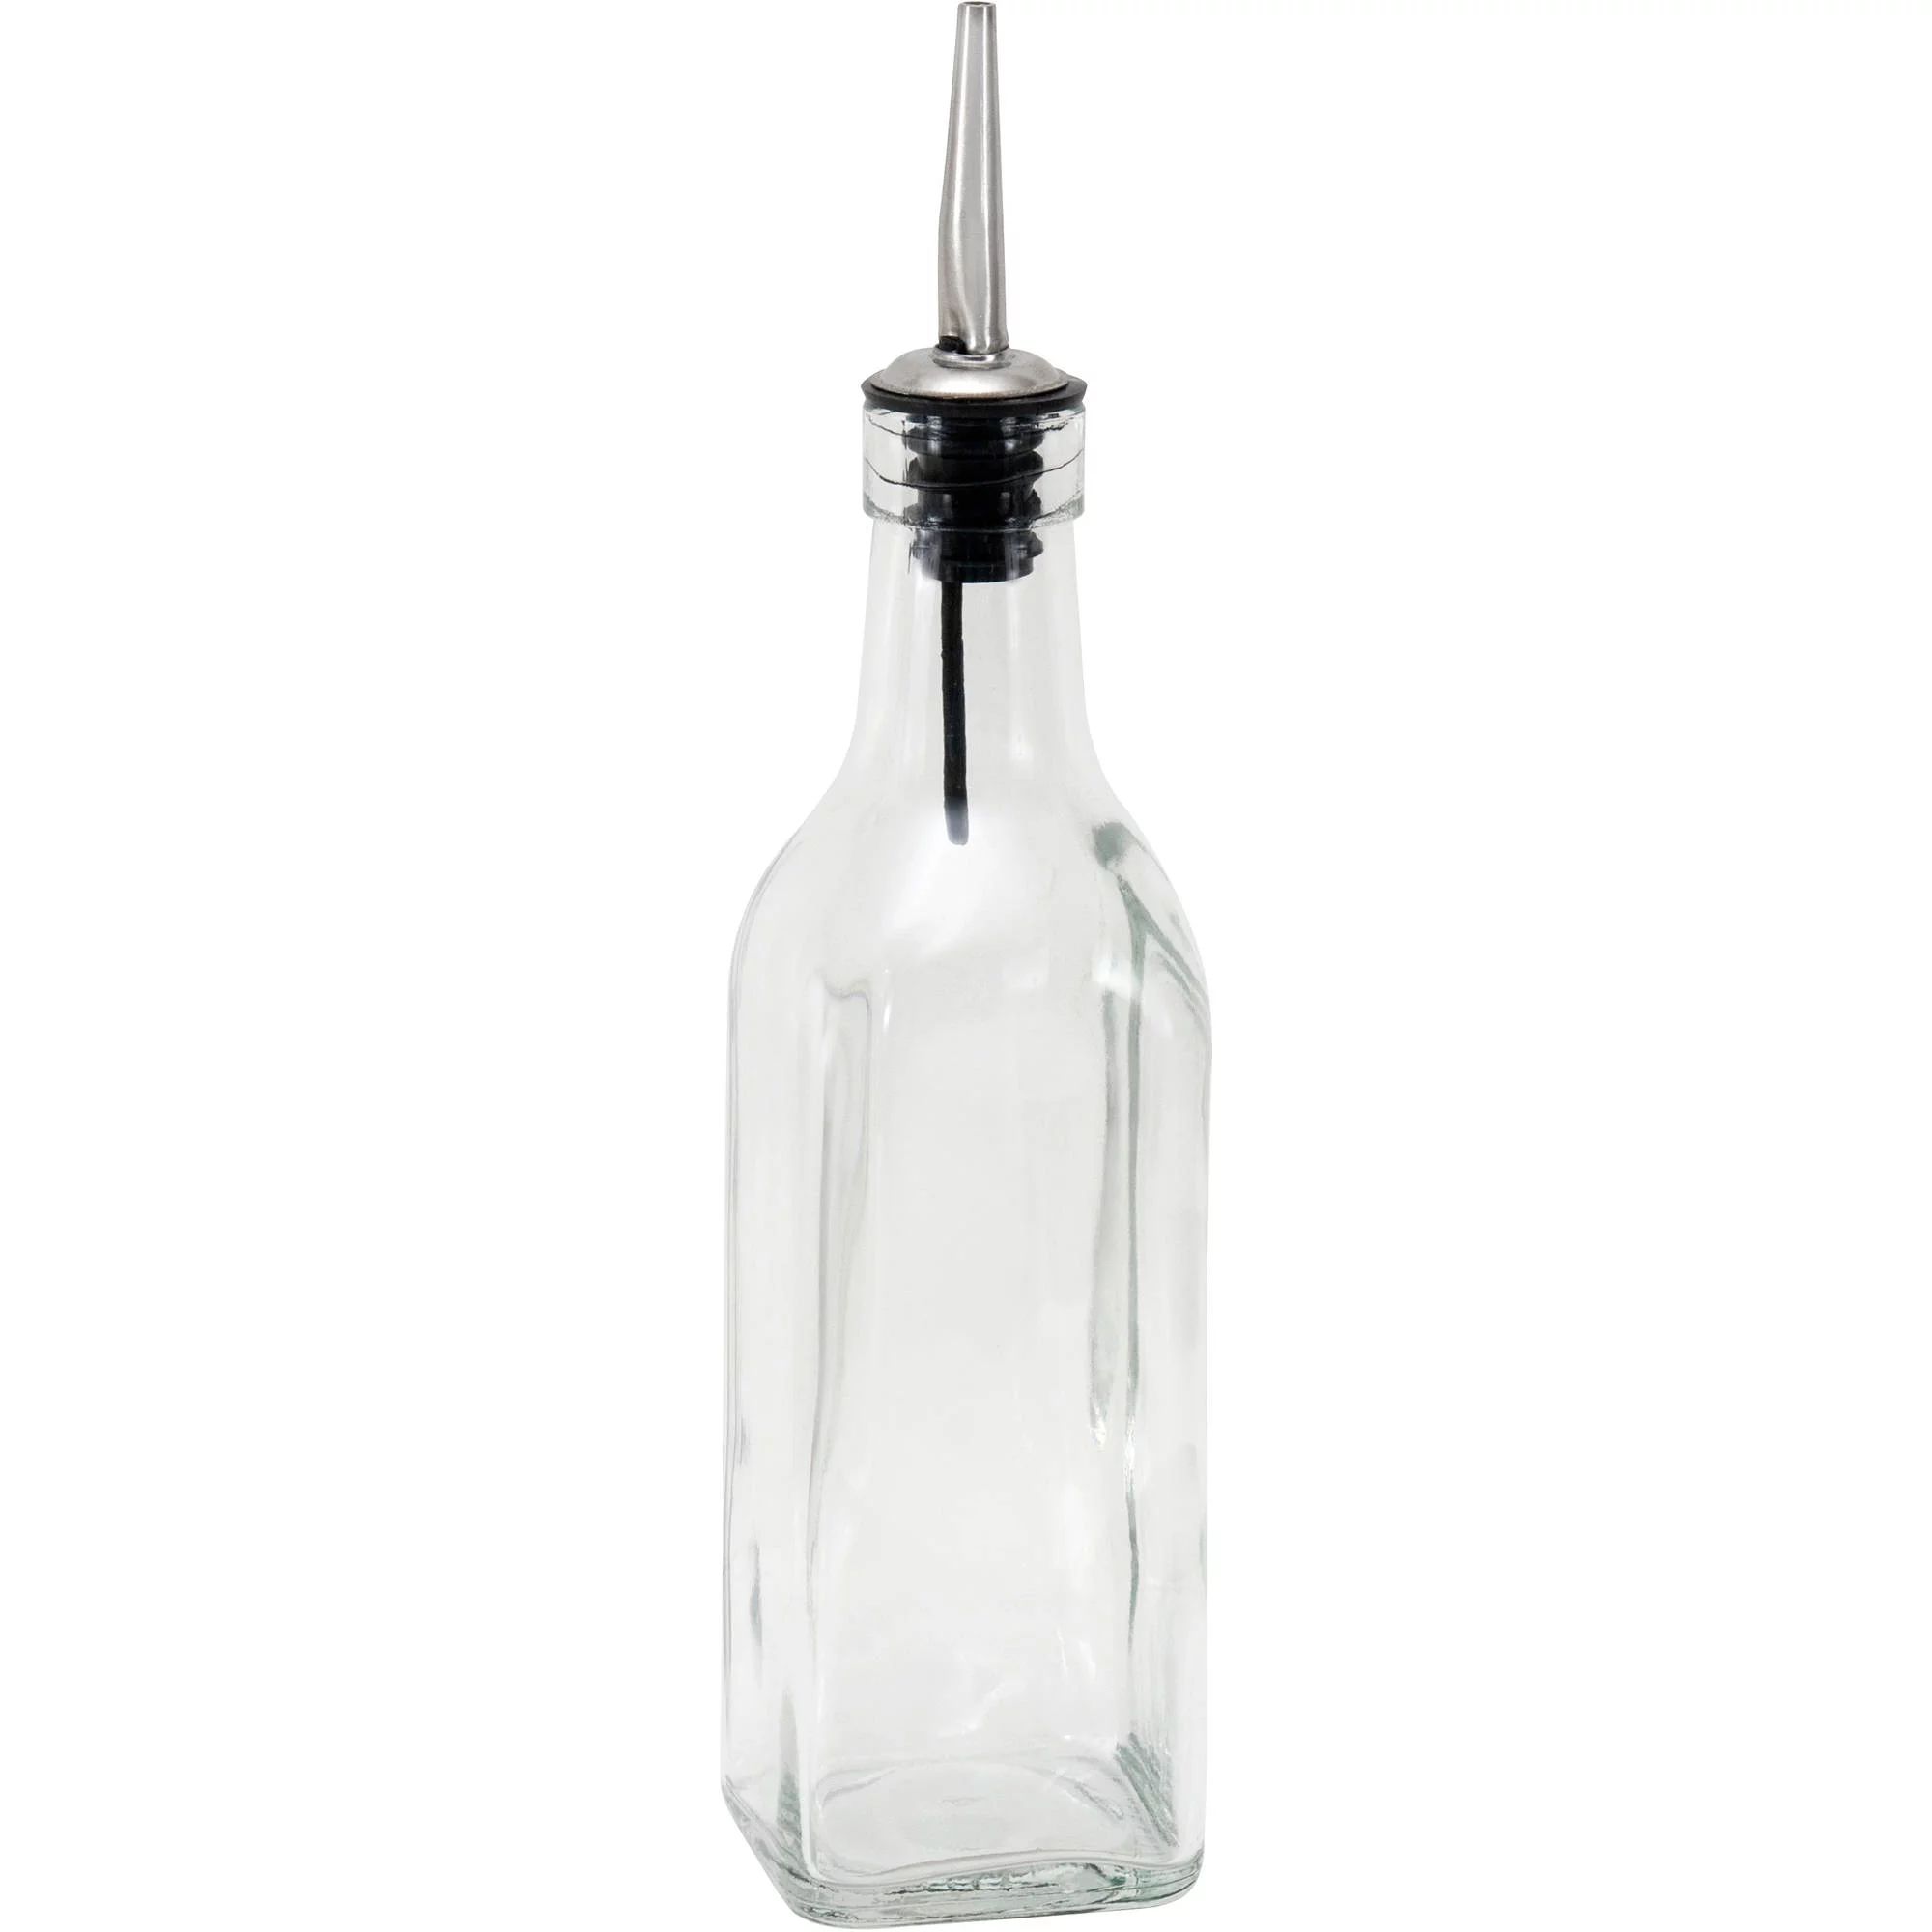 Anchor Hocking Oil/Vinegar Glass Bottle With Stainless Steel Spout | Walmart (US)